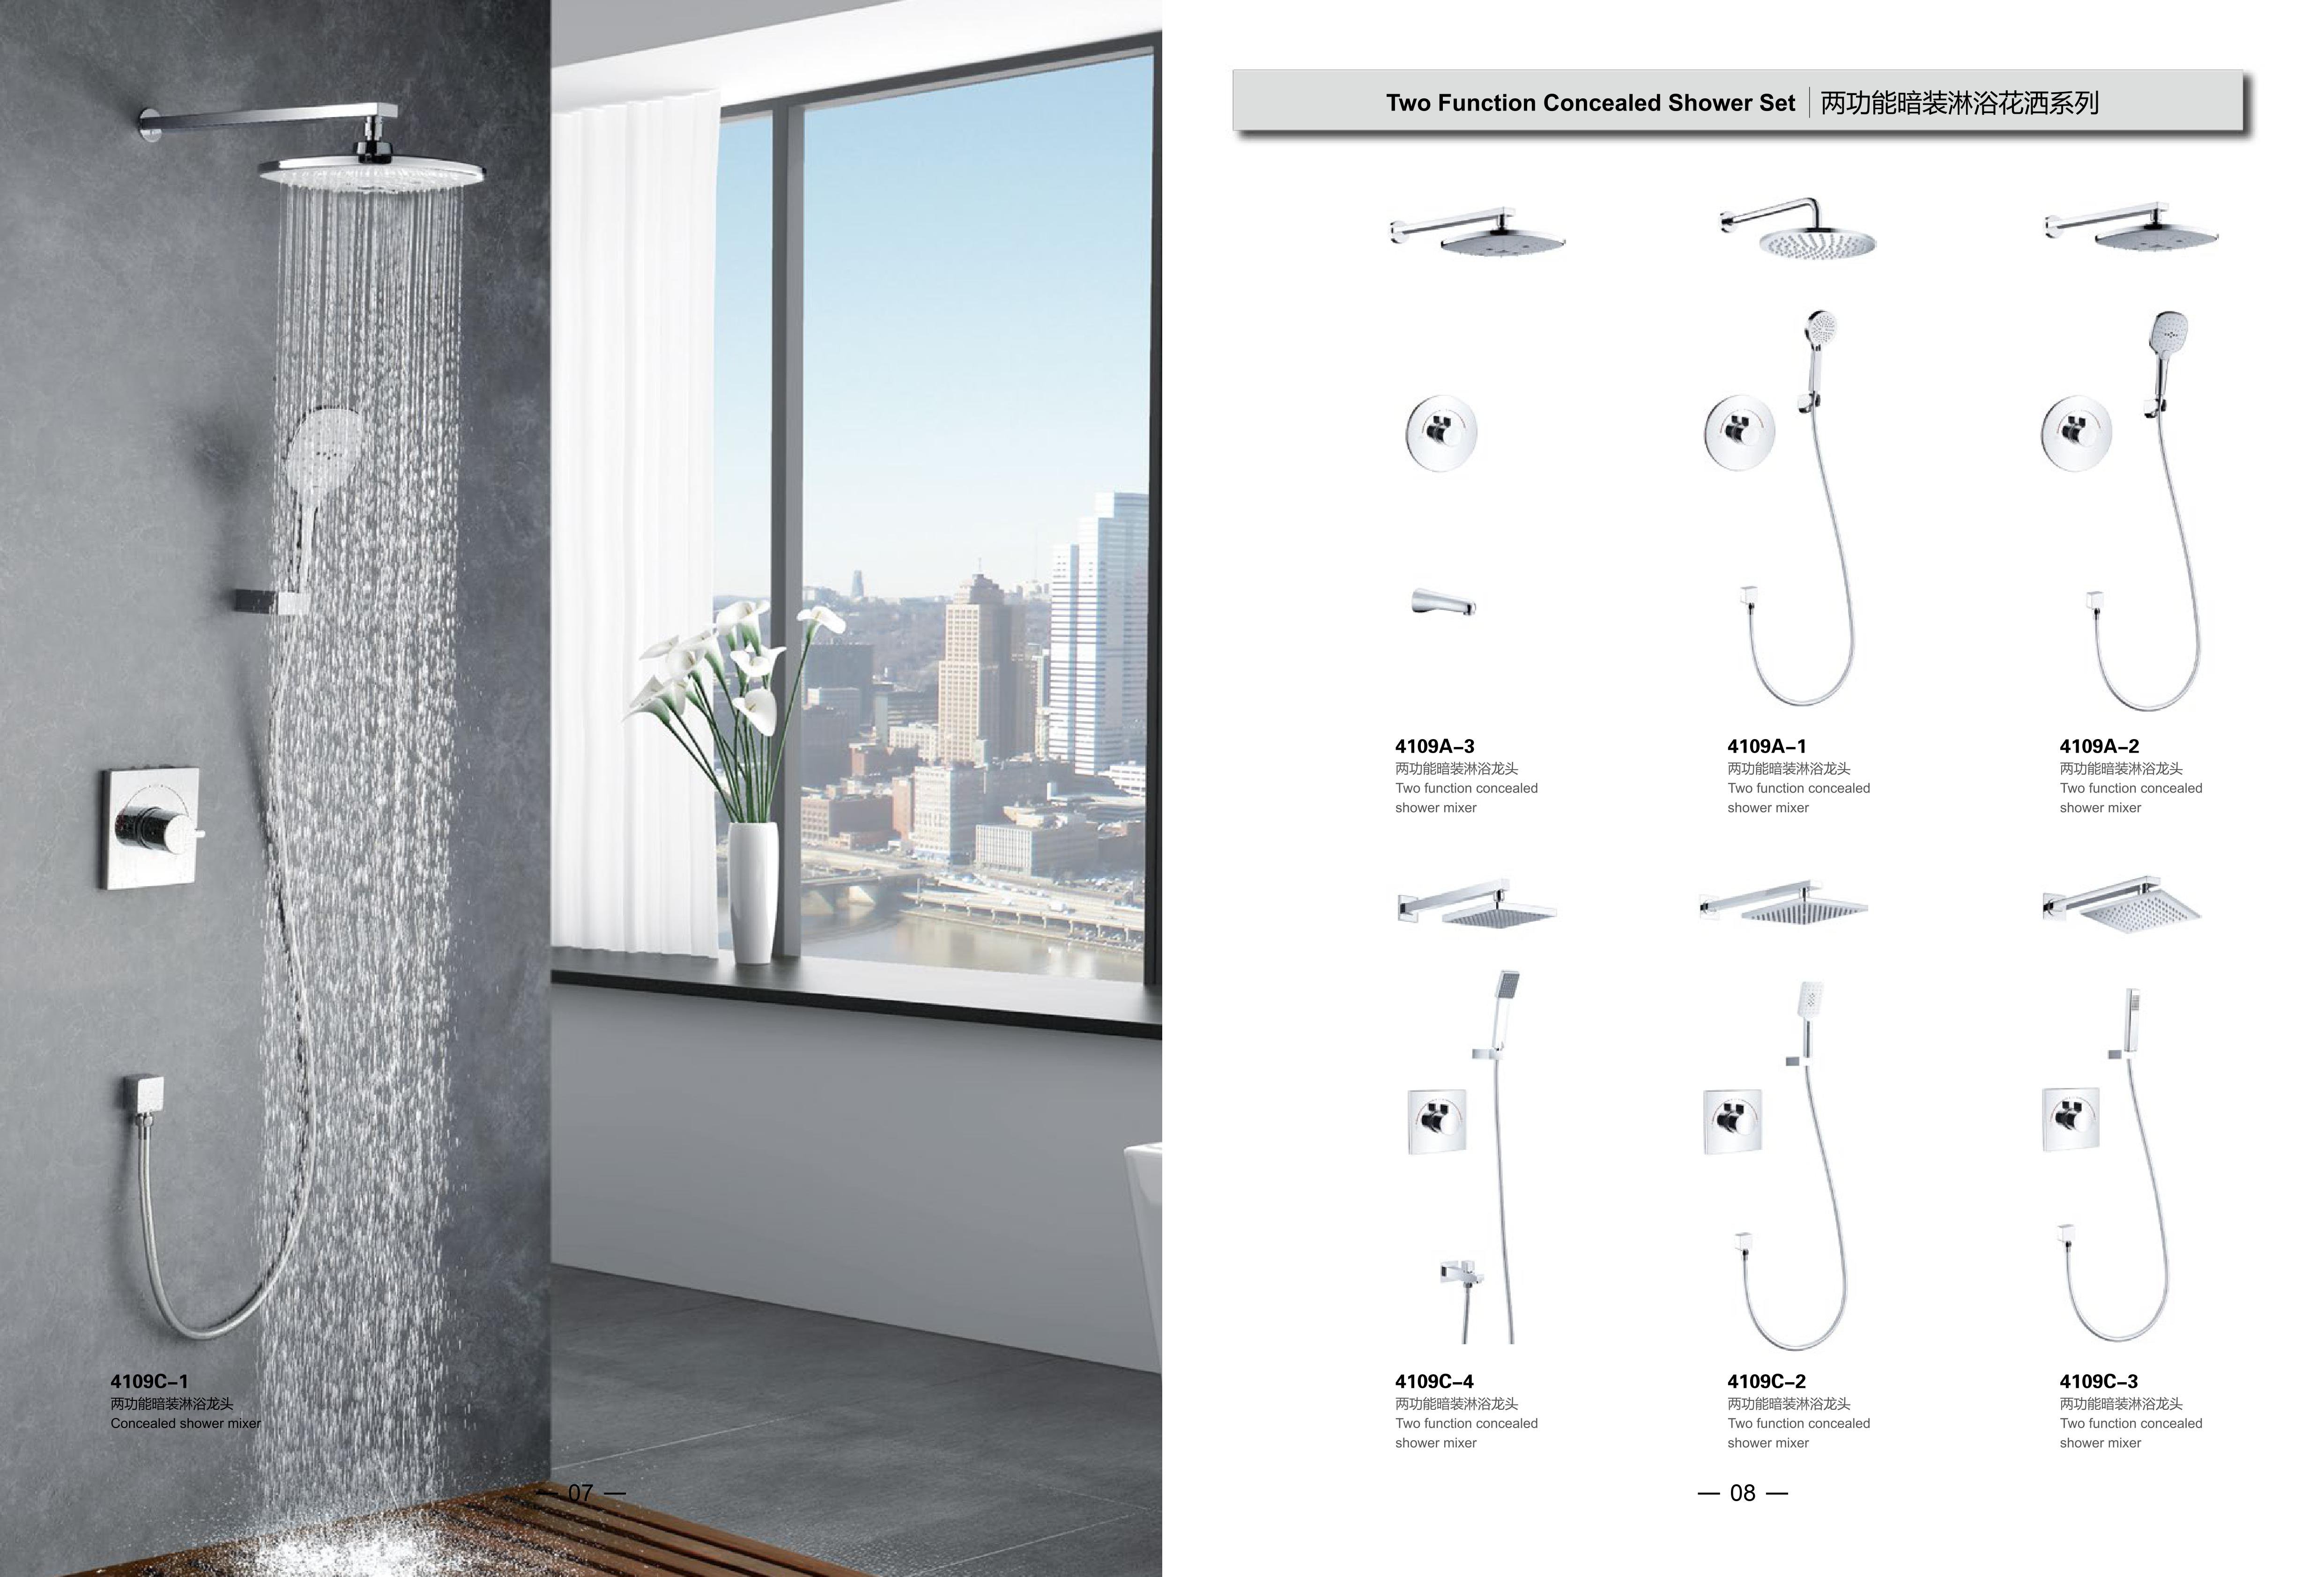 Two Function Concealed Shower Set